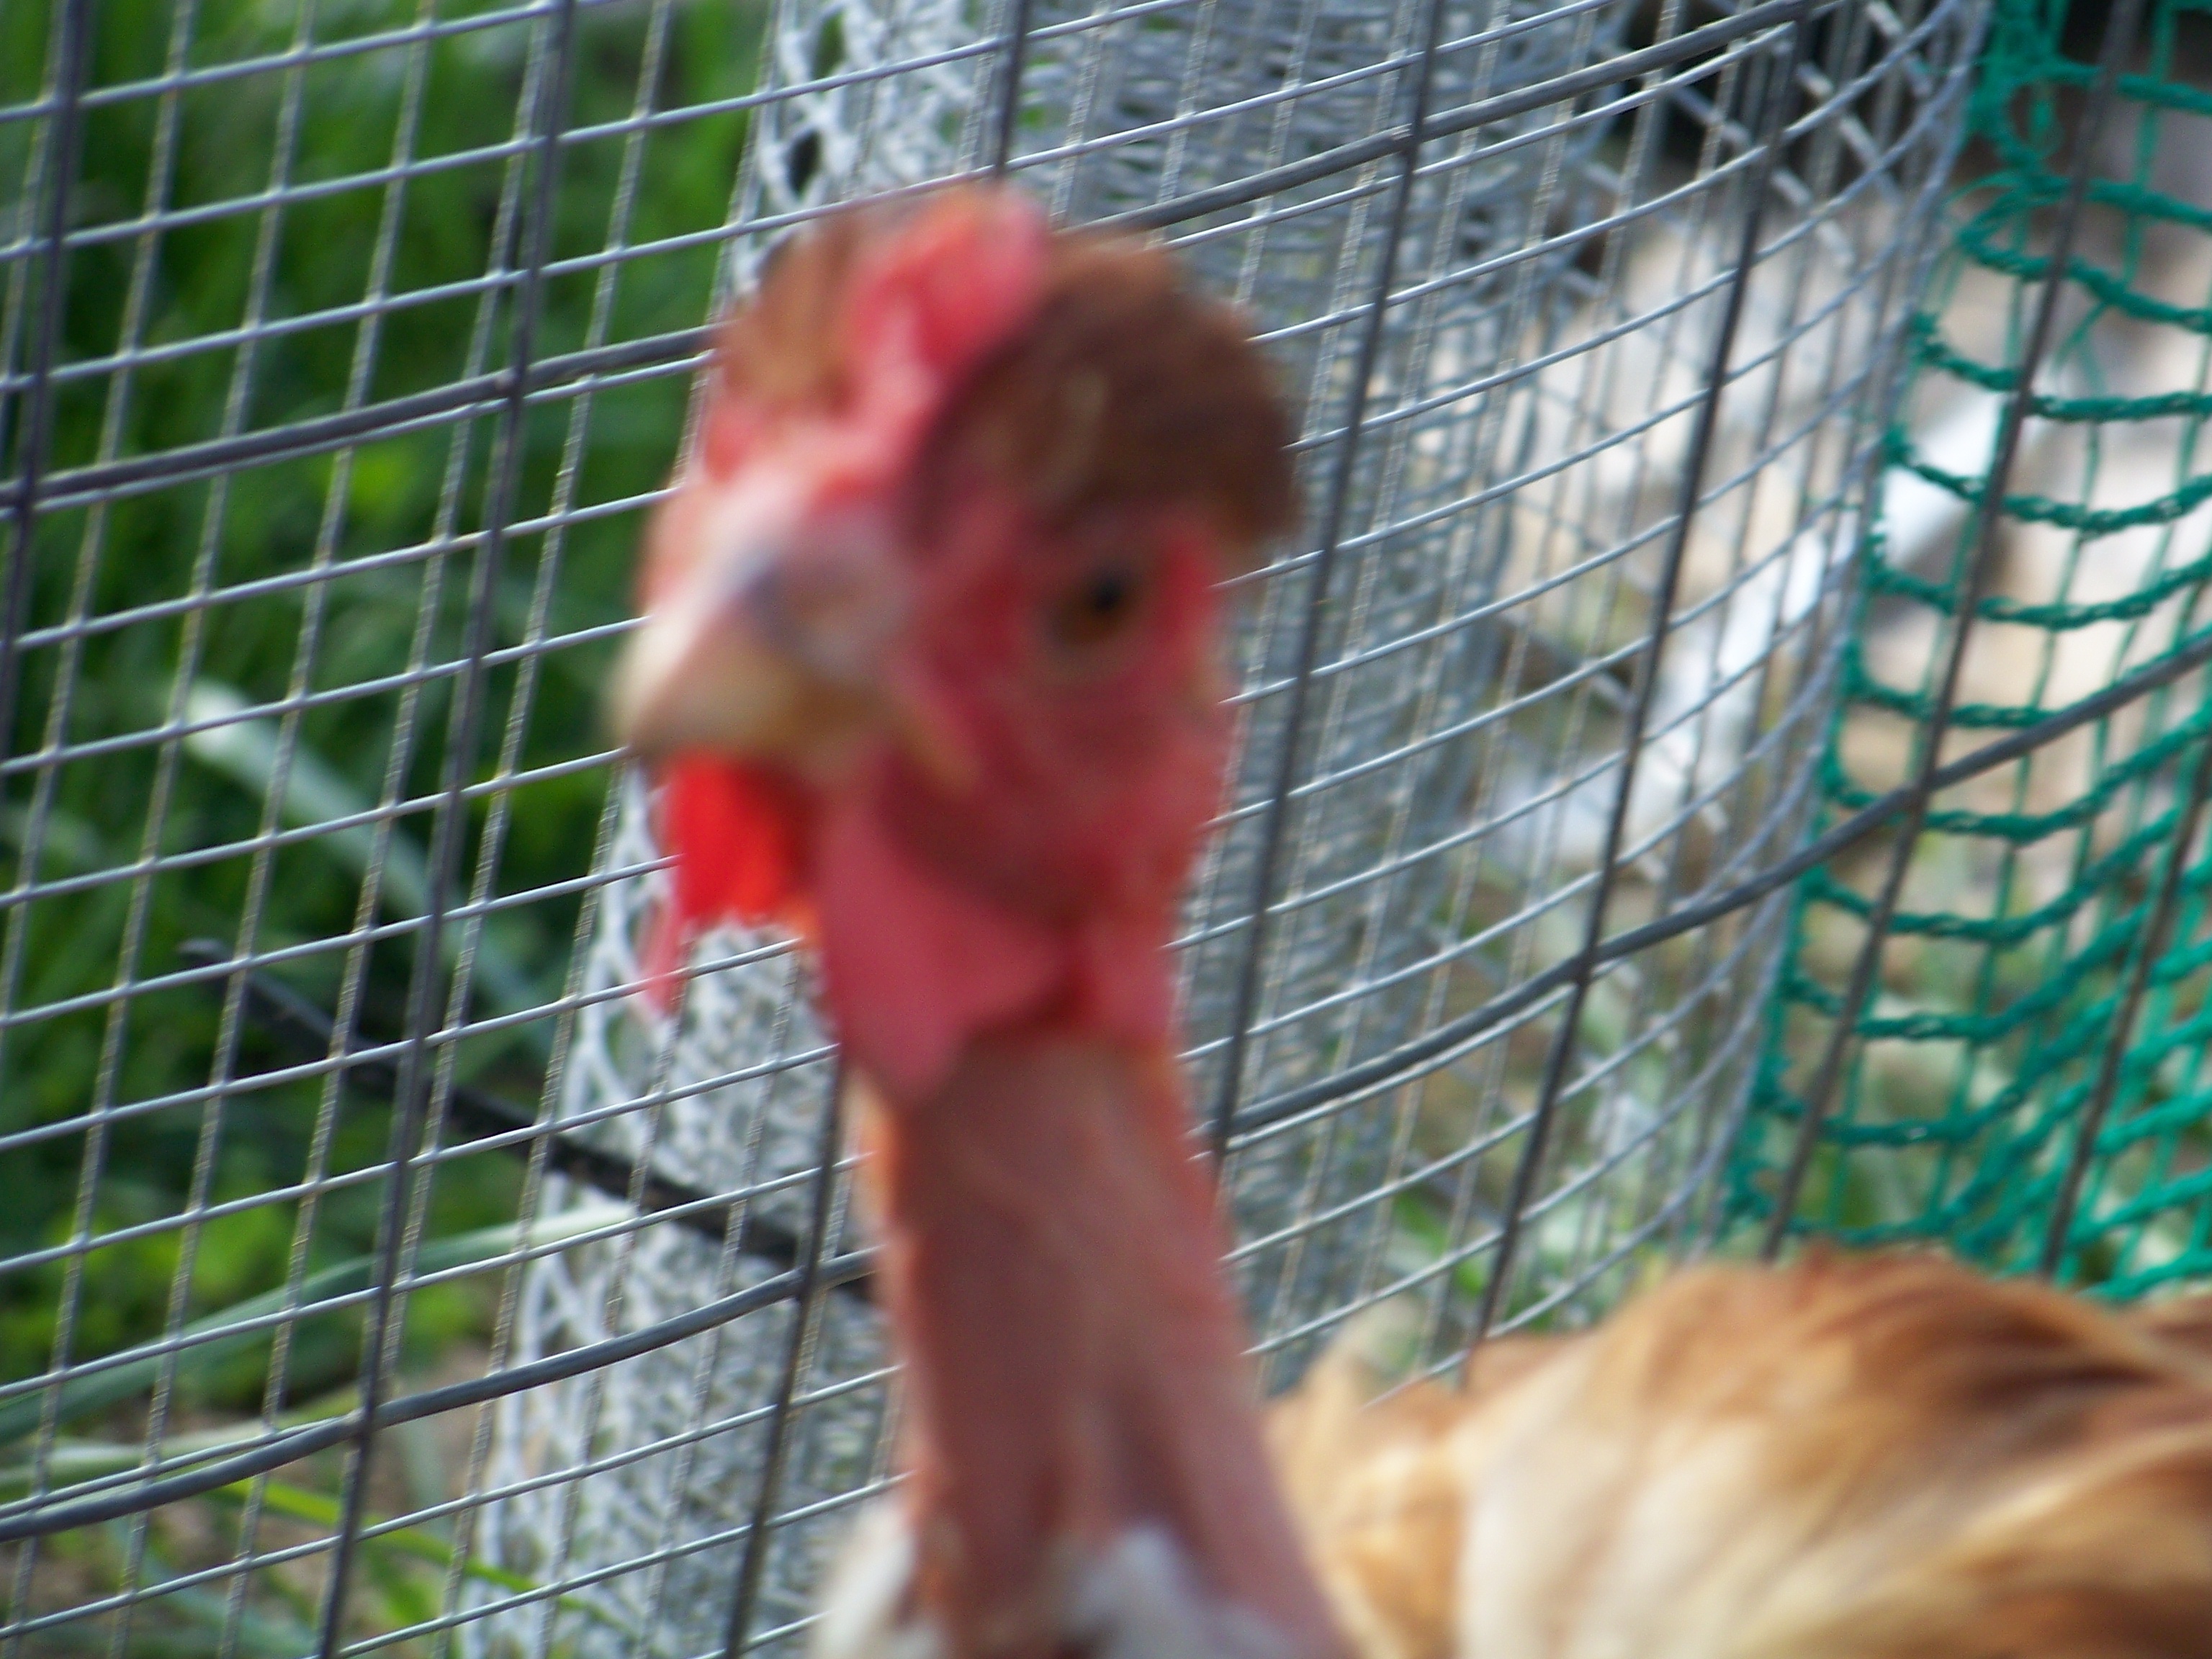 Archibald (NN hen) trying to be cute, but moving too fast for the camera.